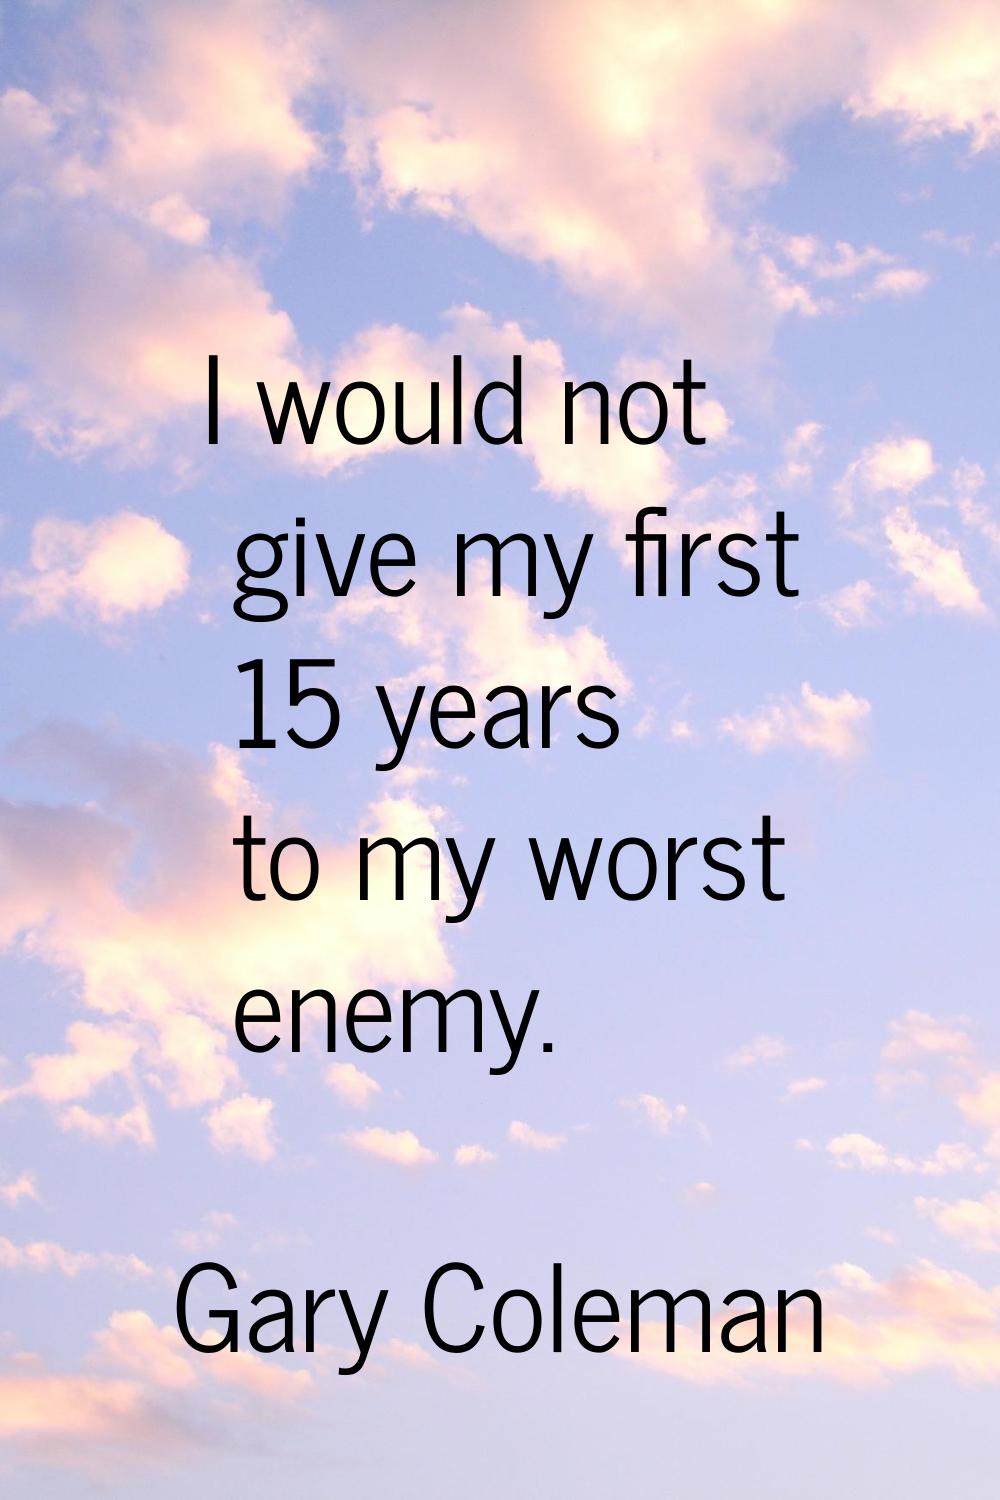 I would not give my first 15 years to my worst enemy.